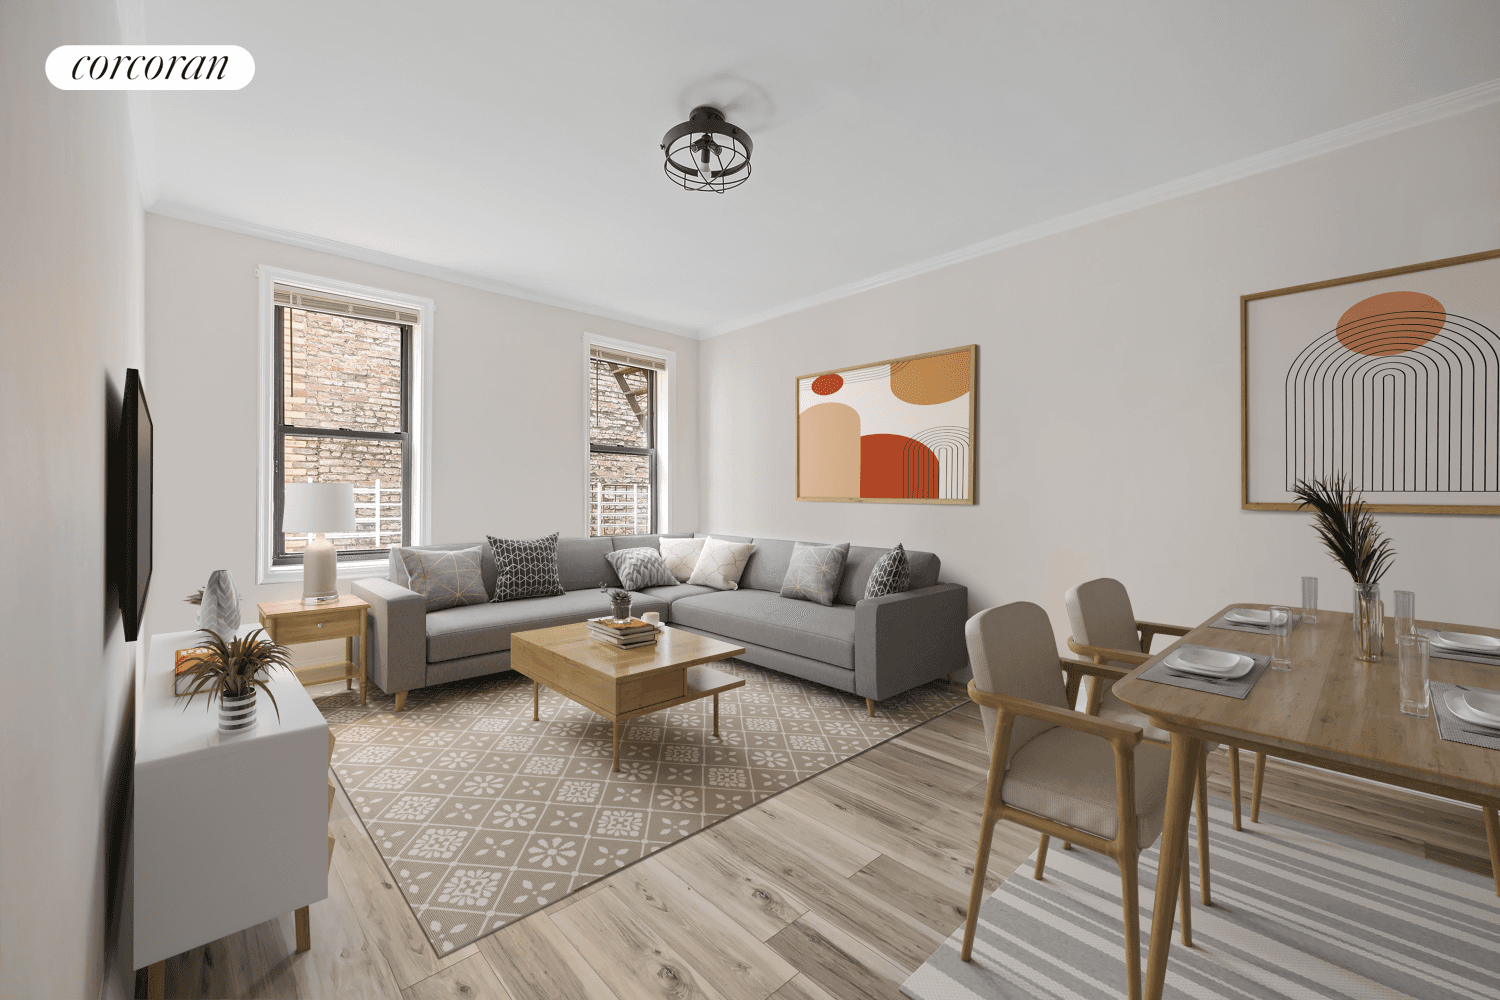 Discover Modern Elegance at 43 33 48th Avenue 3B, Sunnyside Bliss CondominiumsStep into the inviting 711 sq ft space of this fully renovated one bedroom condo and experience urban living ...